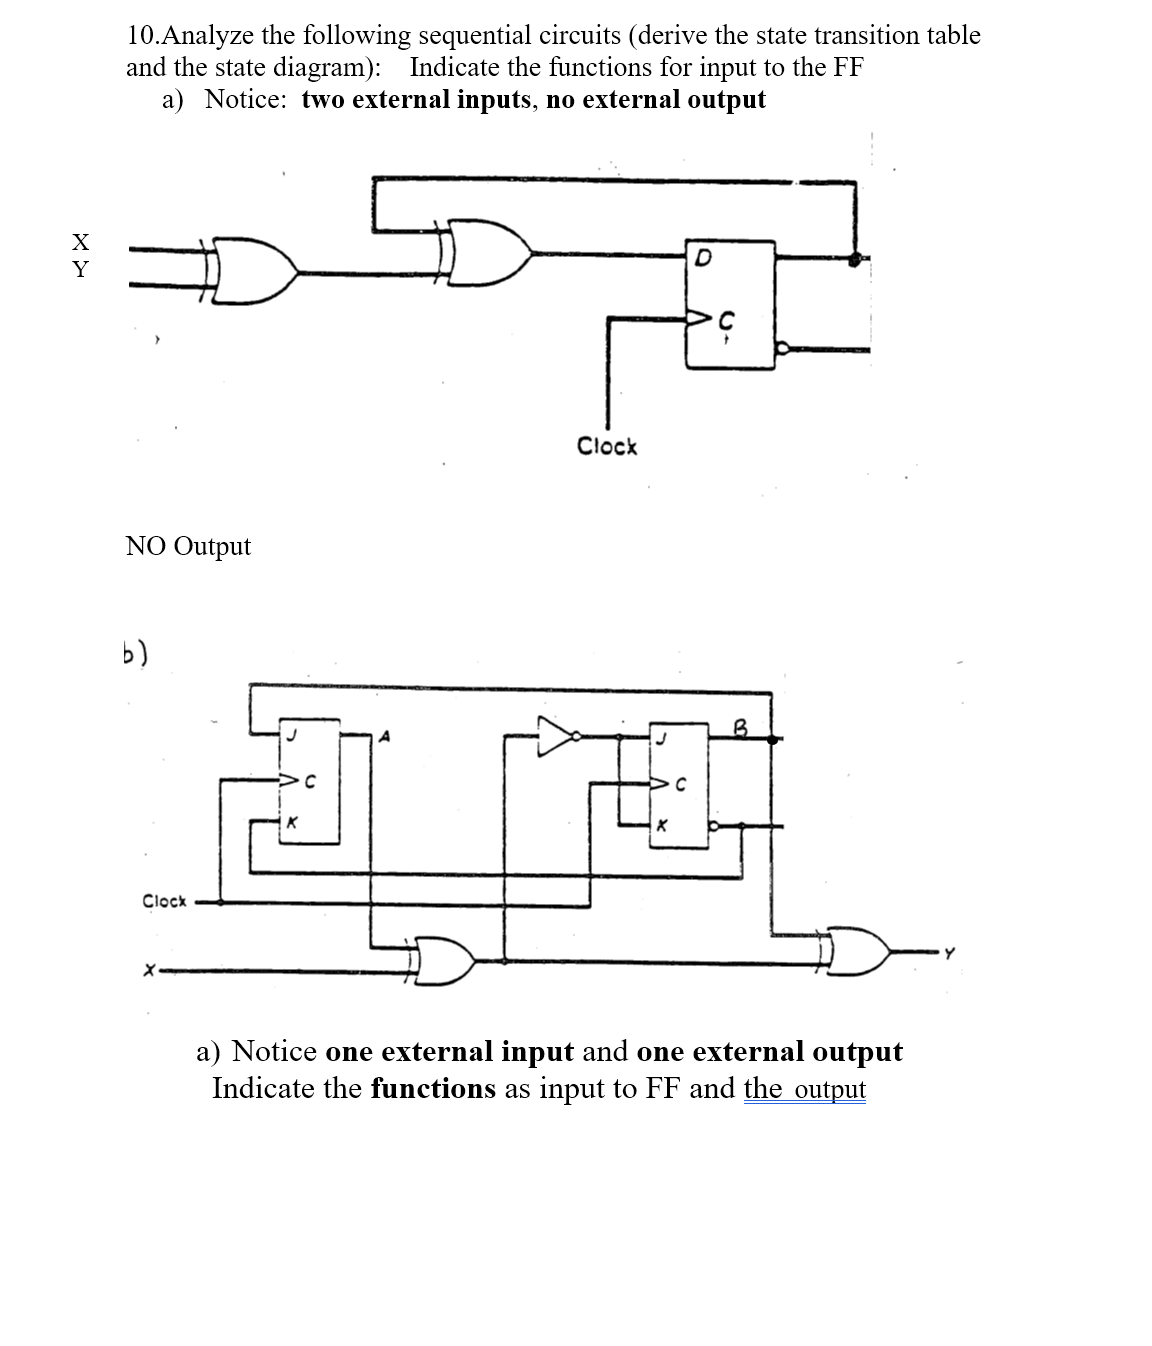 10.Analyze the following sequential circuits (derive the state transition table
and the state diagram): Indicate the functions for input to the FF
a) Notice: two external inputs, no external output
X
Y
Clock
NO Output
b)
Clock
a) Notice one external input and one external output
Indicate the functions as input to FF and the output
